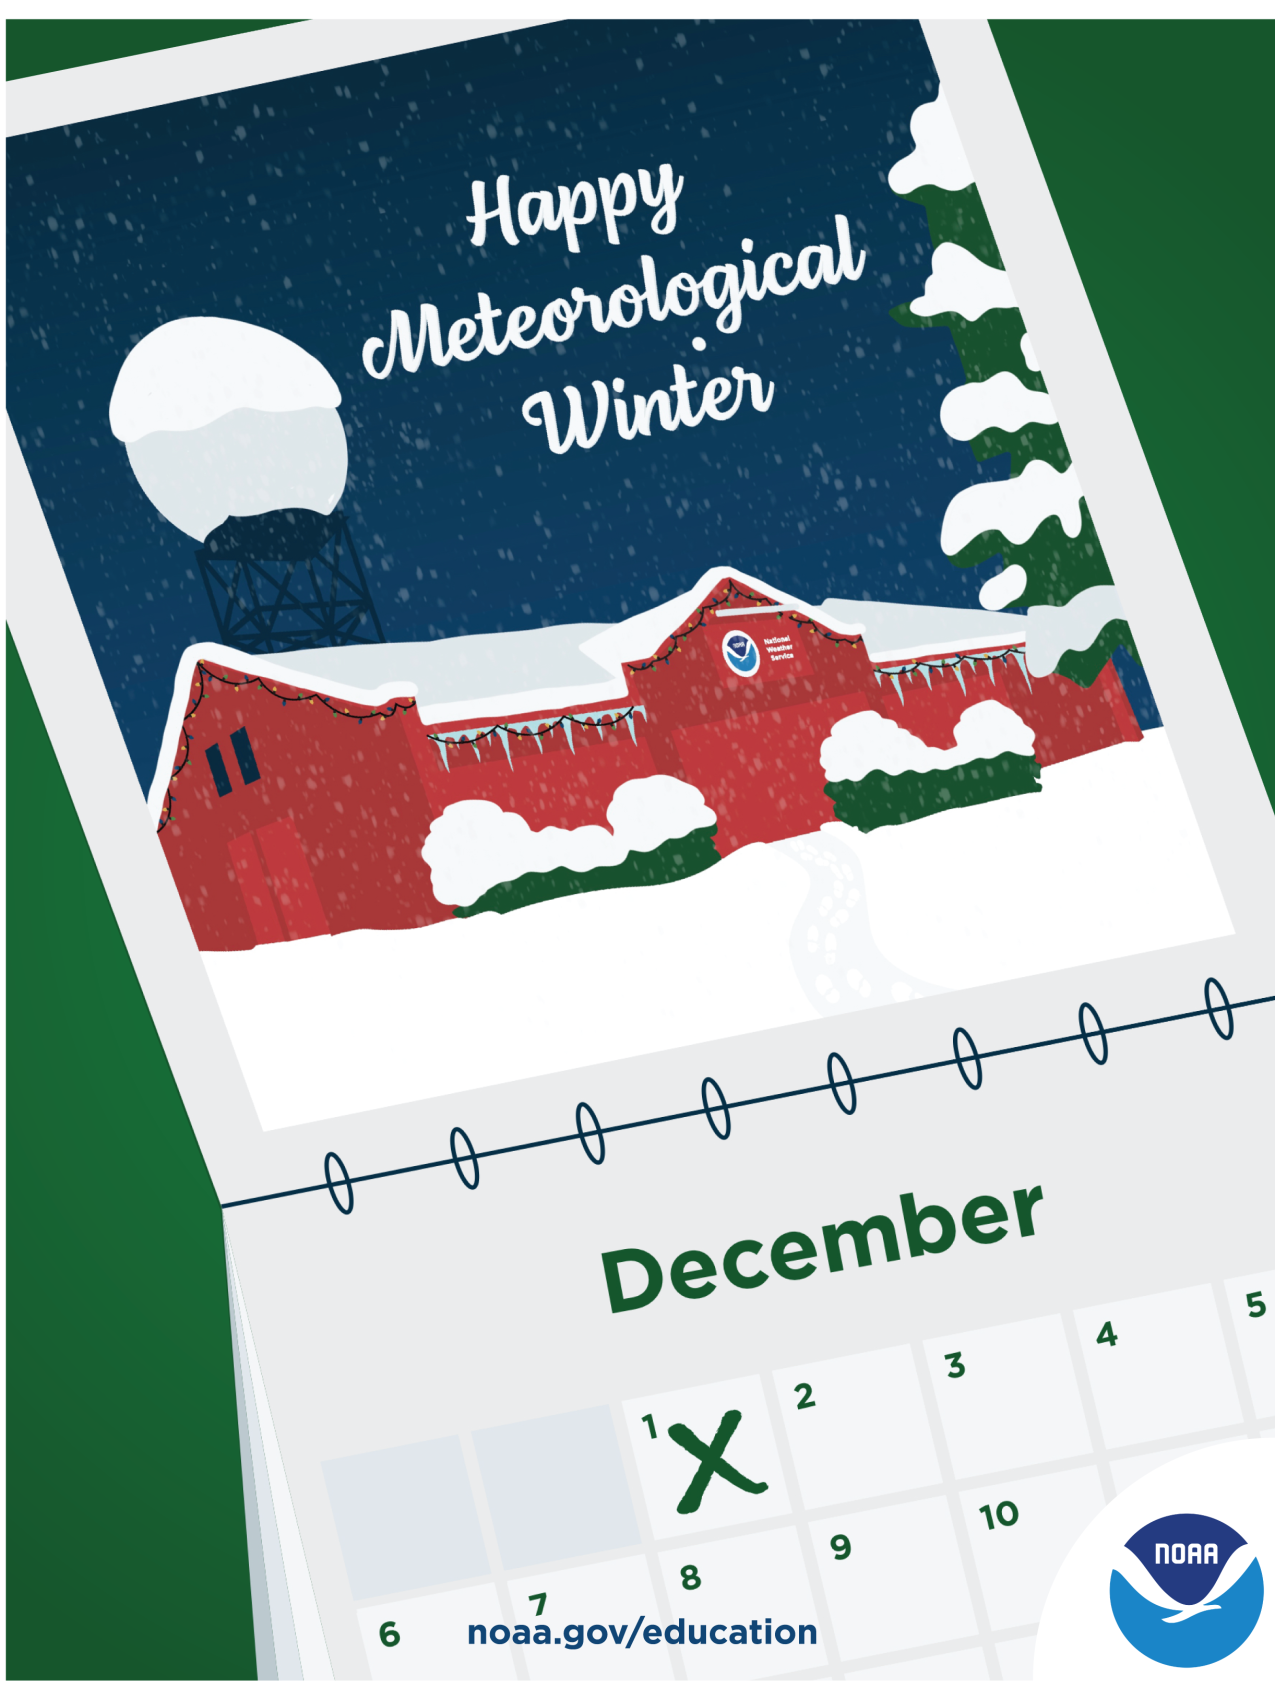 An illustrated holiday card featuring a calendar flipped to December, with the date of December 1st marked with an "X." The art on the calendar depicts a National Weather Service office covered in snow. There is a NOAA logo in the corner of the card. Text: Happy meteorological winter! noaa.gov/education